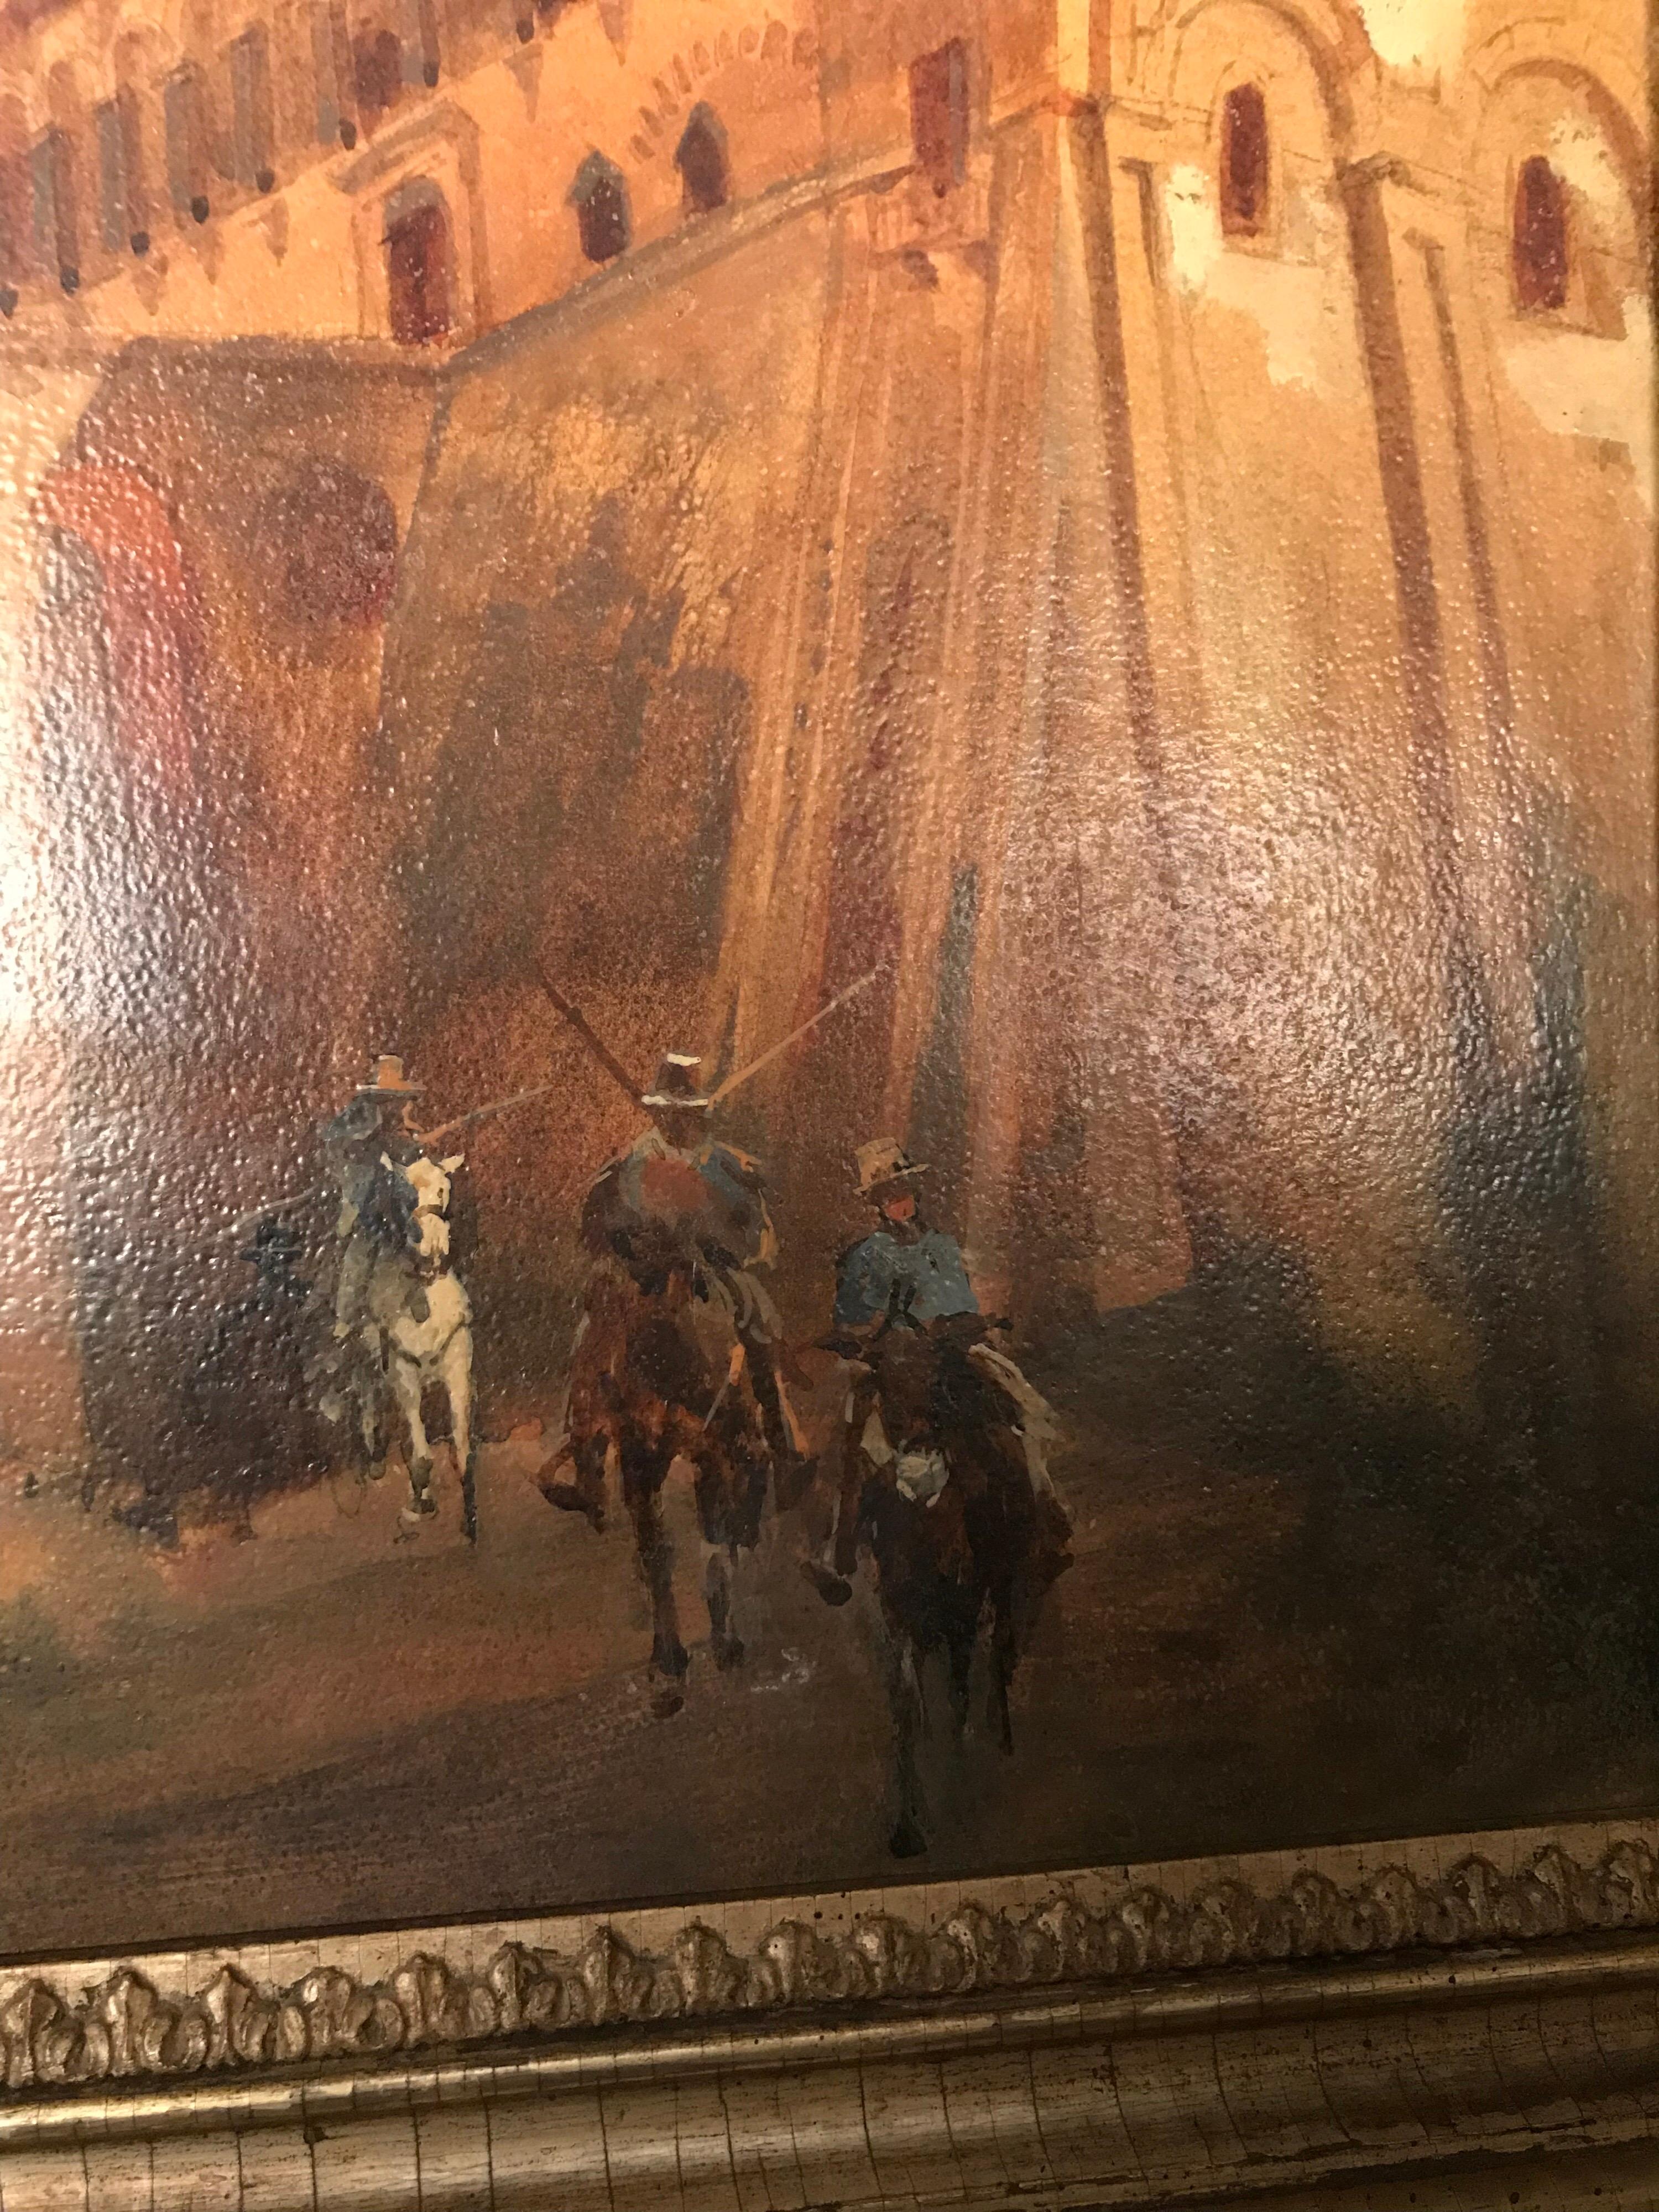 Wood Oil Painting Jacob, Julius Berlin 1842 Genazzano, Piscopal Palace and Bridgeacce For Sale